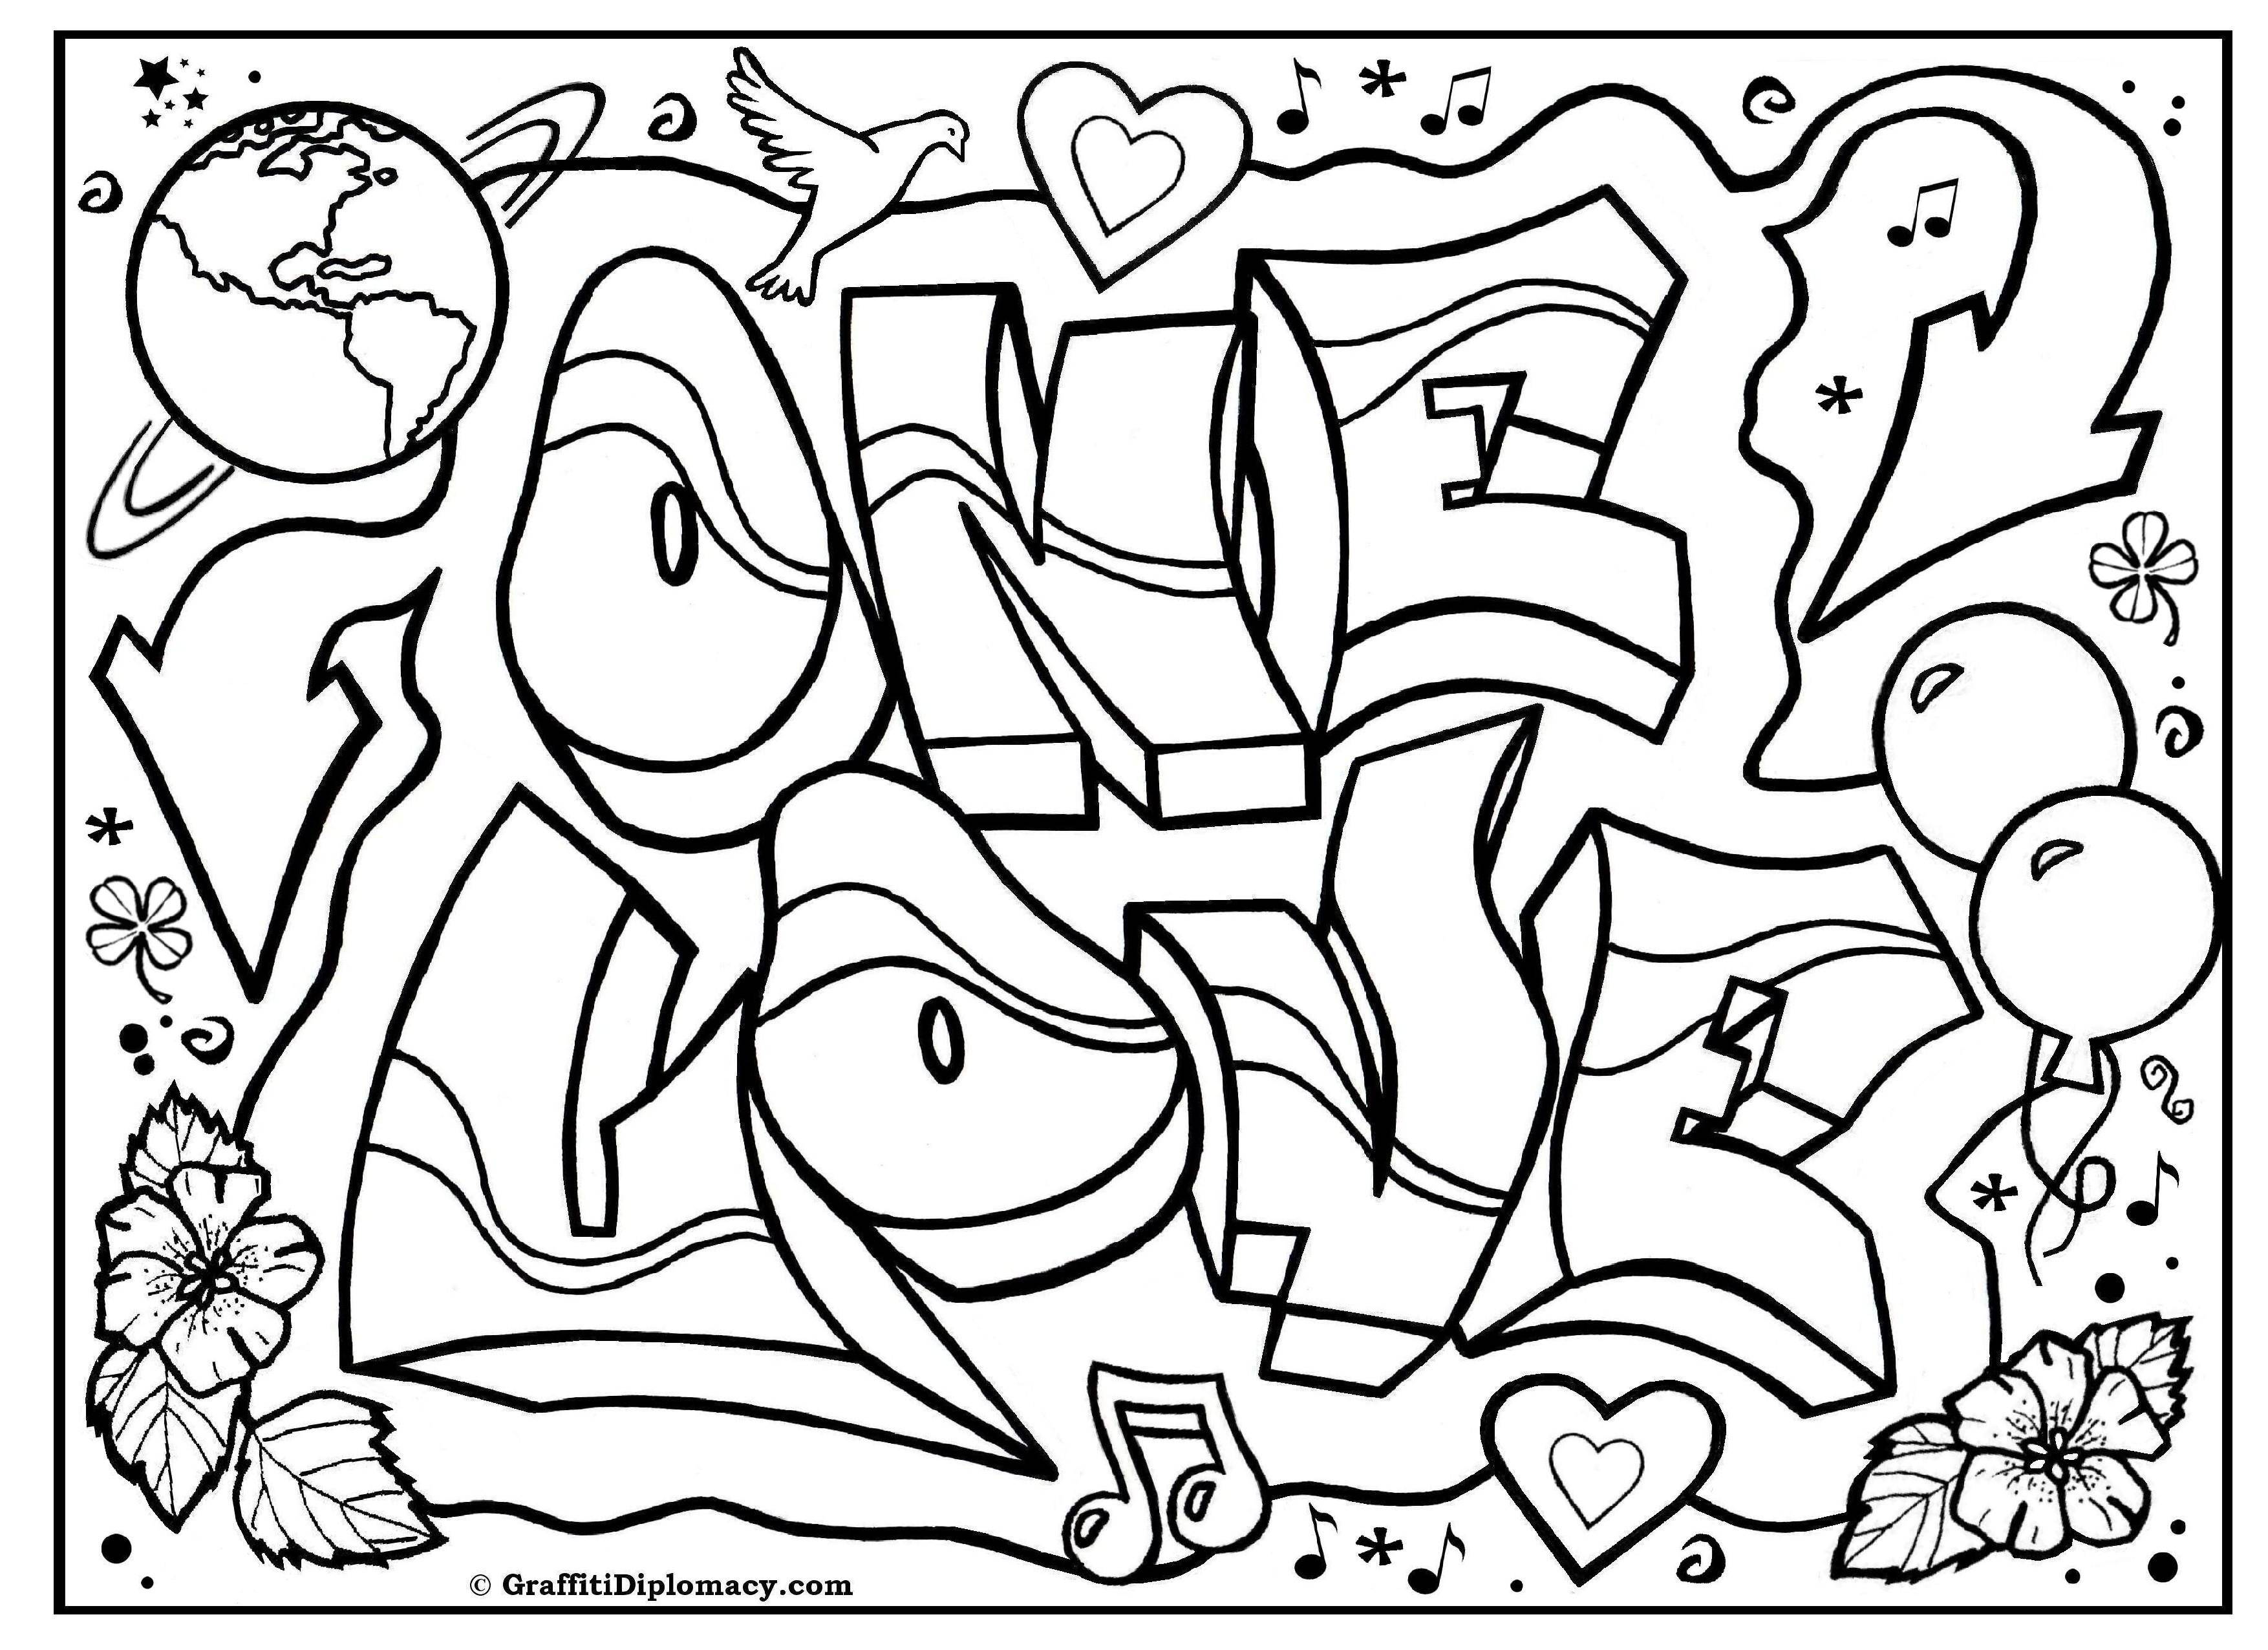 Coloring One love. Category coloring. Tags:  Labels, patterns.